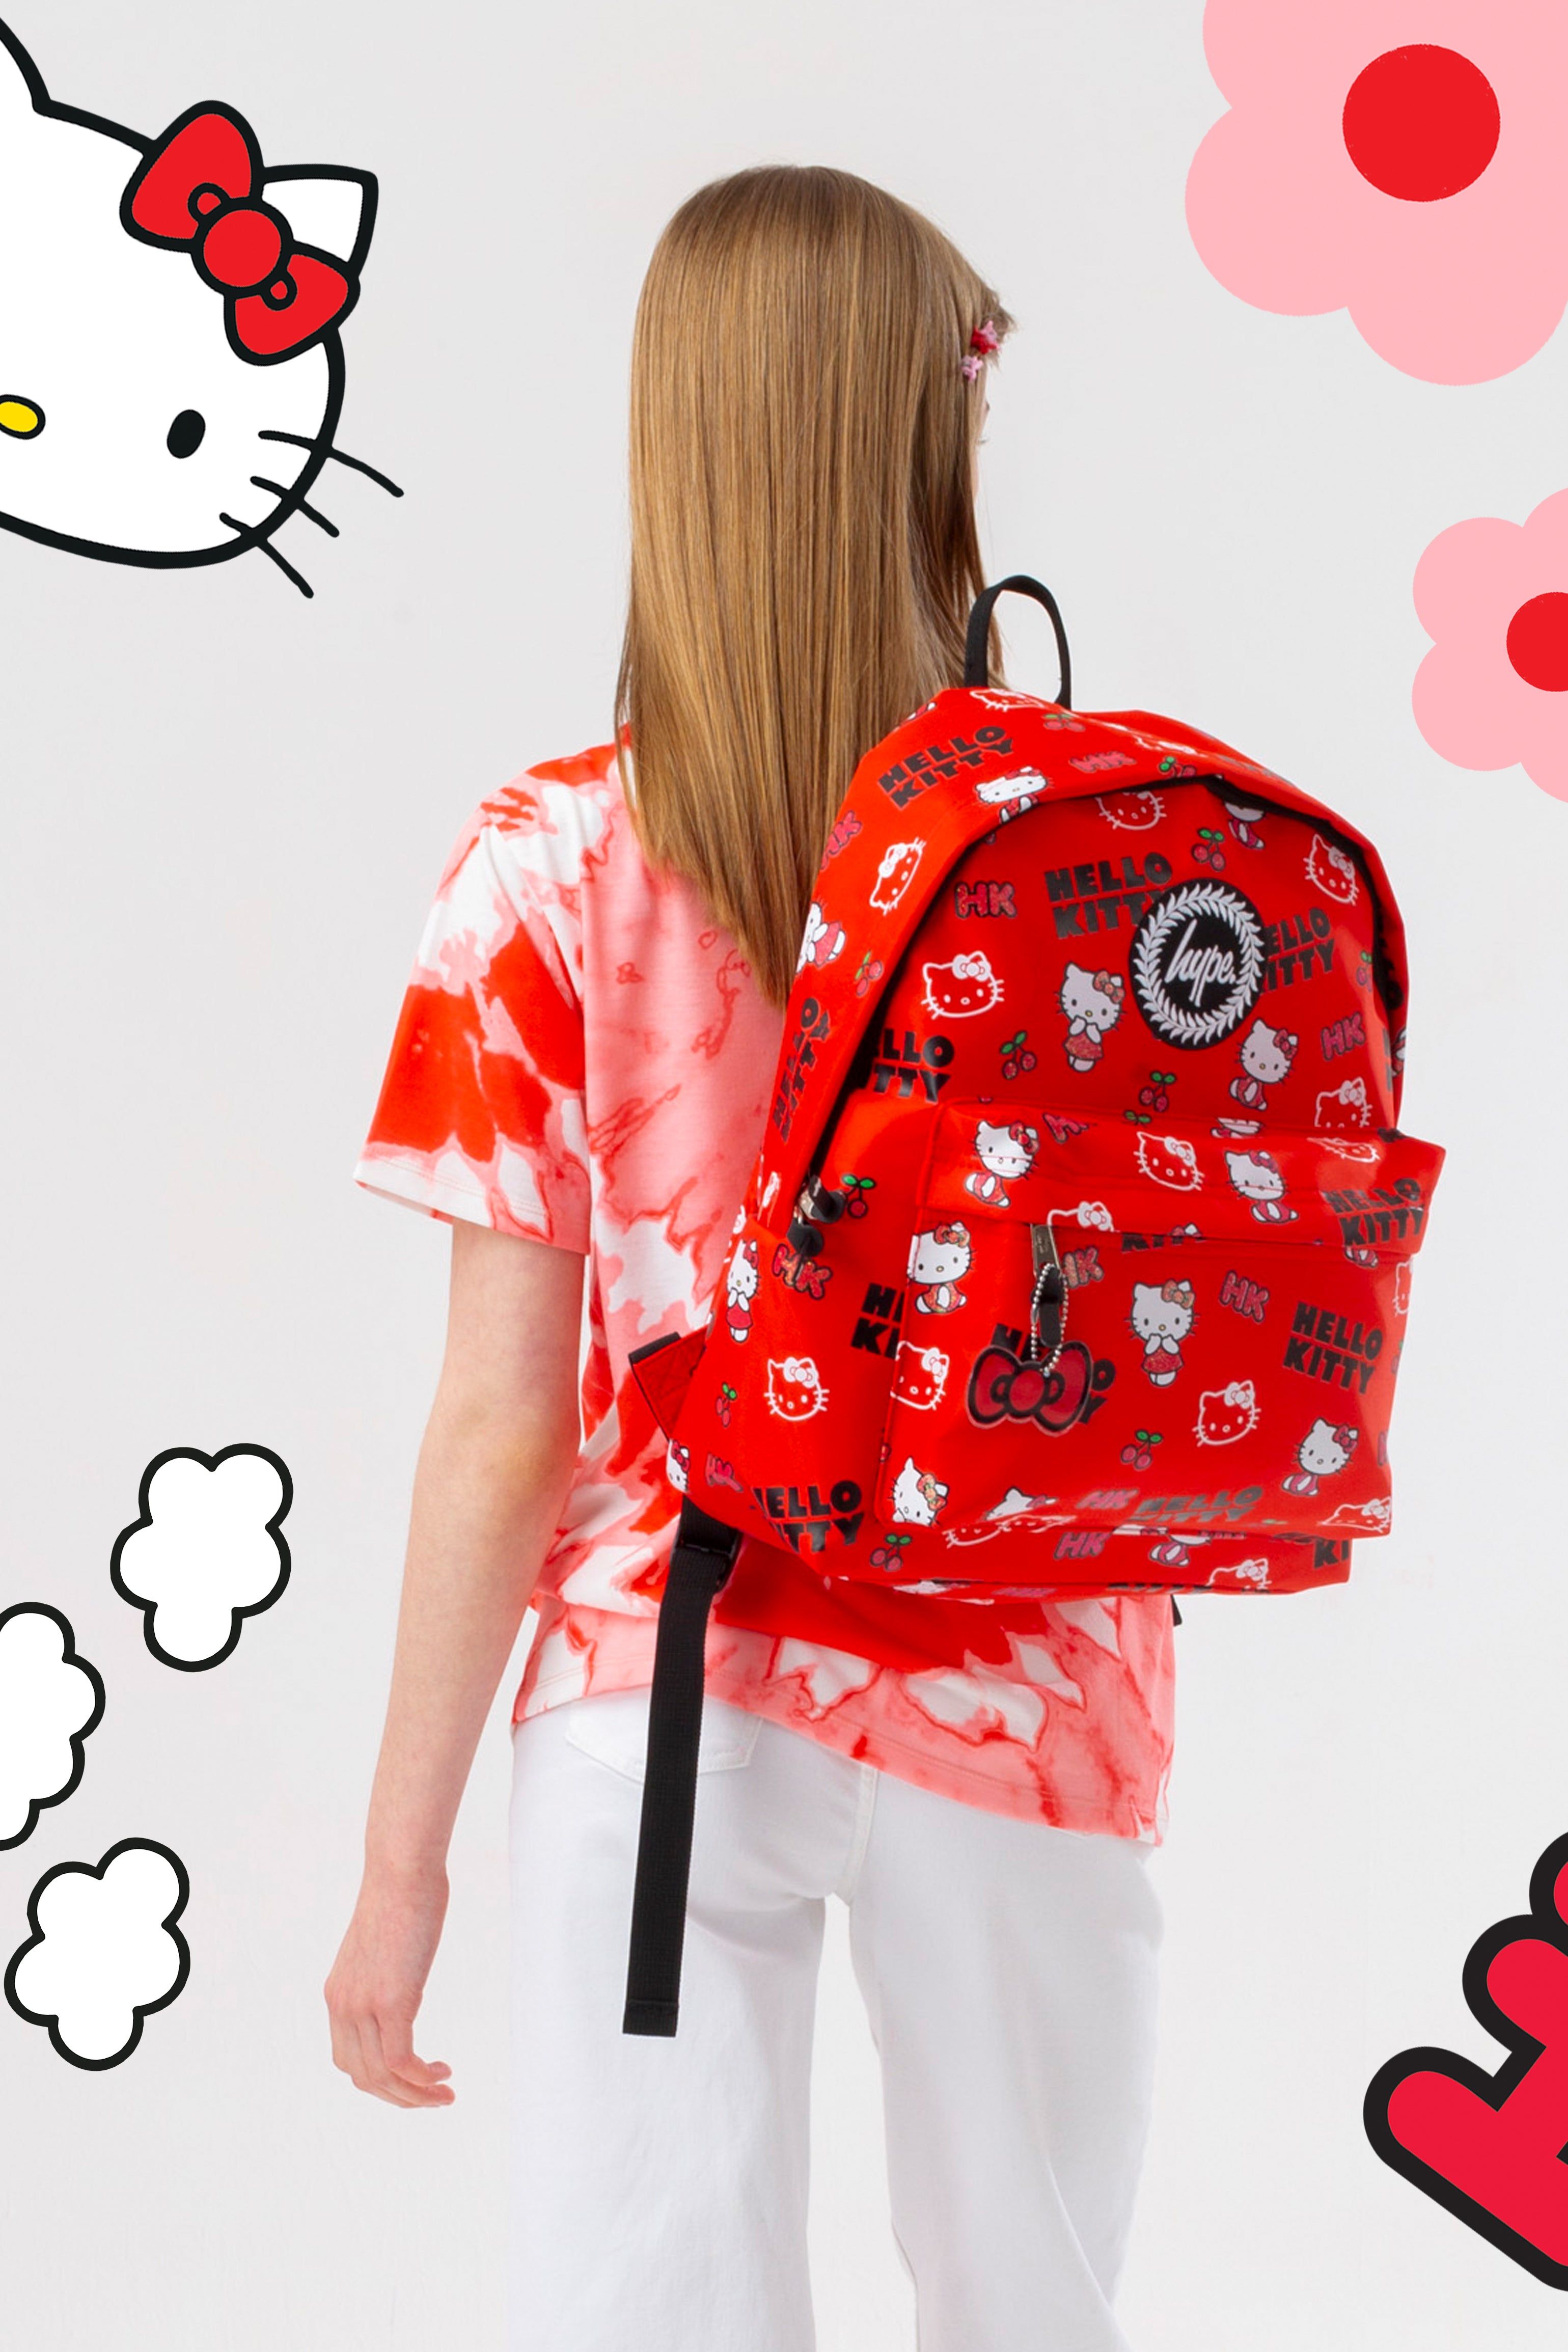 You can never have too many backpacks! Meet the HYPE. X Hello Kitty Mini Print Backpack, part of our brand new collaboration collection and your new go-to accessory. Designed in our standard backpack shape in a red nylon fabric, boasting screen print detail, navy glitter, bow charm detail, and the iconic HYPE. crest logo. 